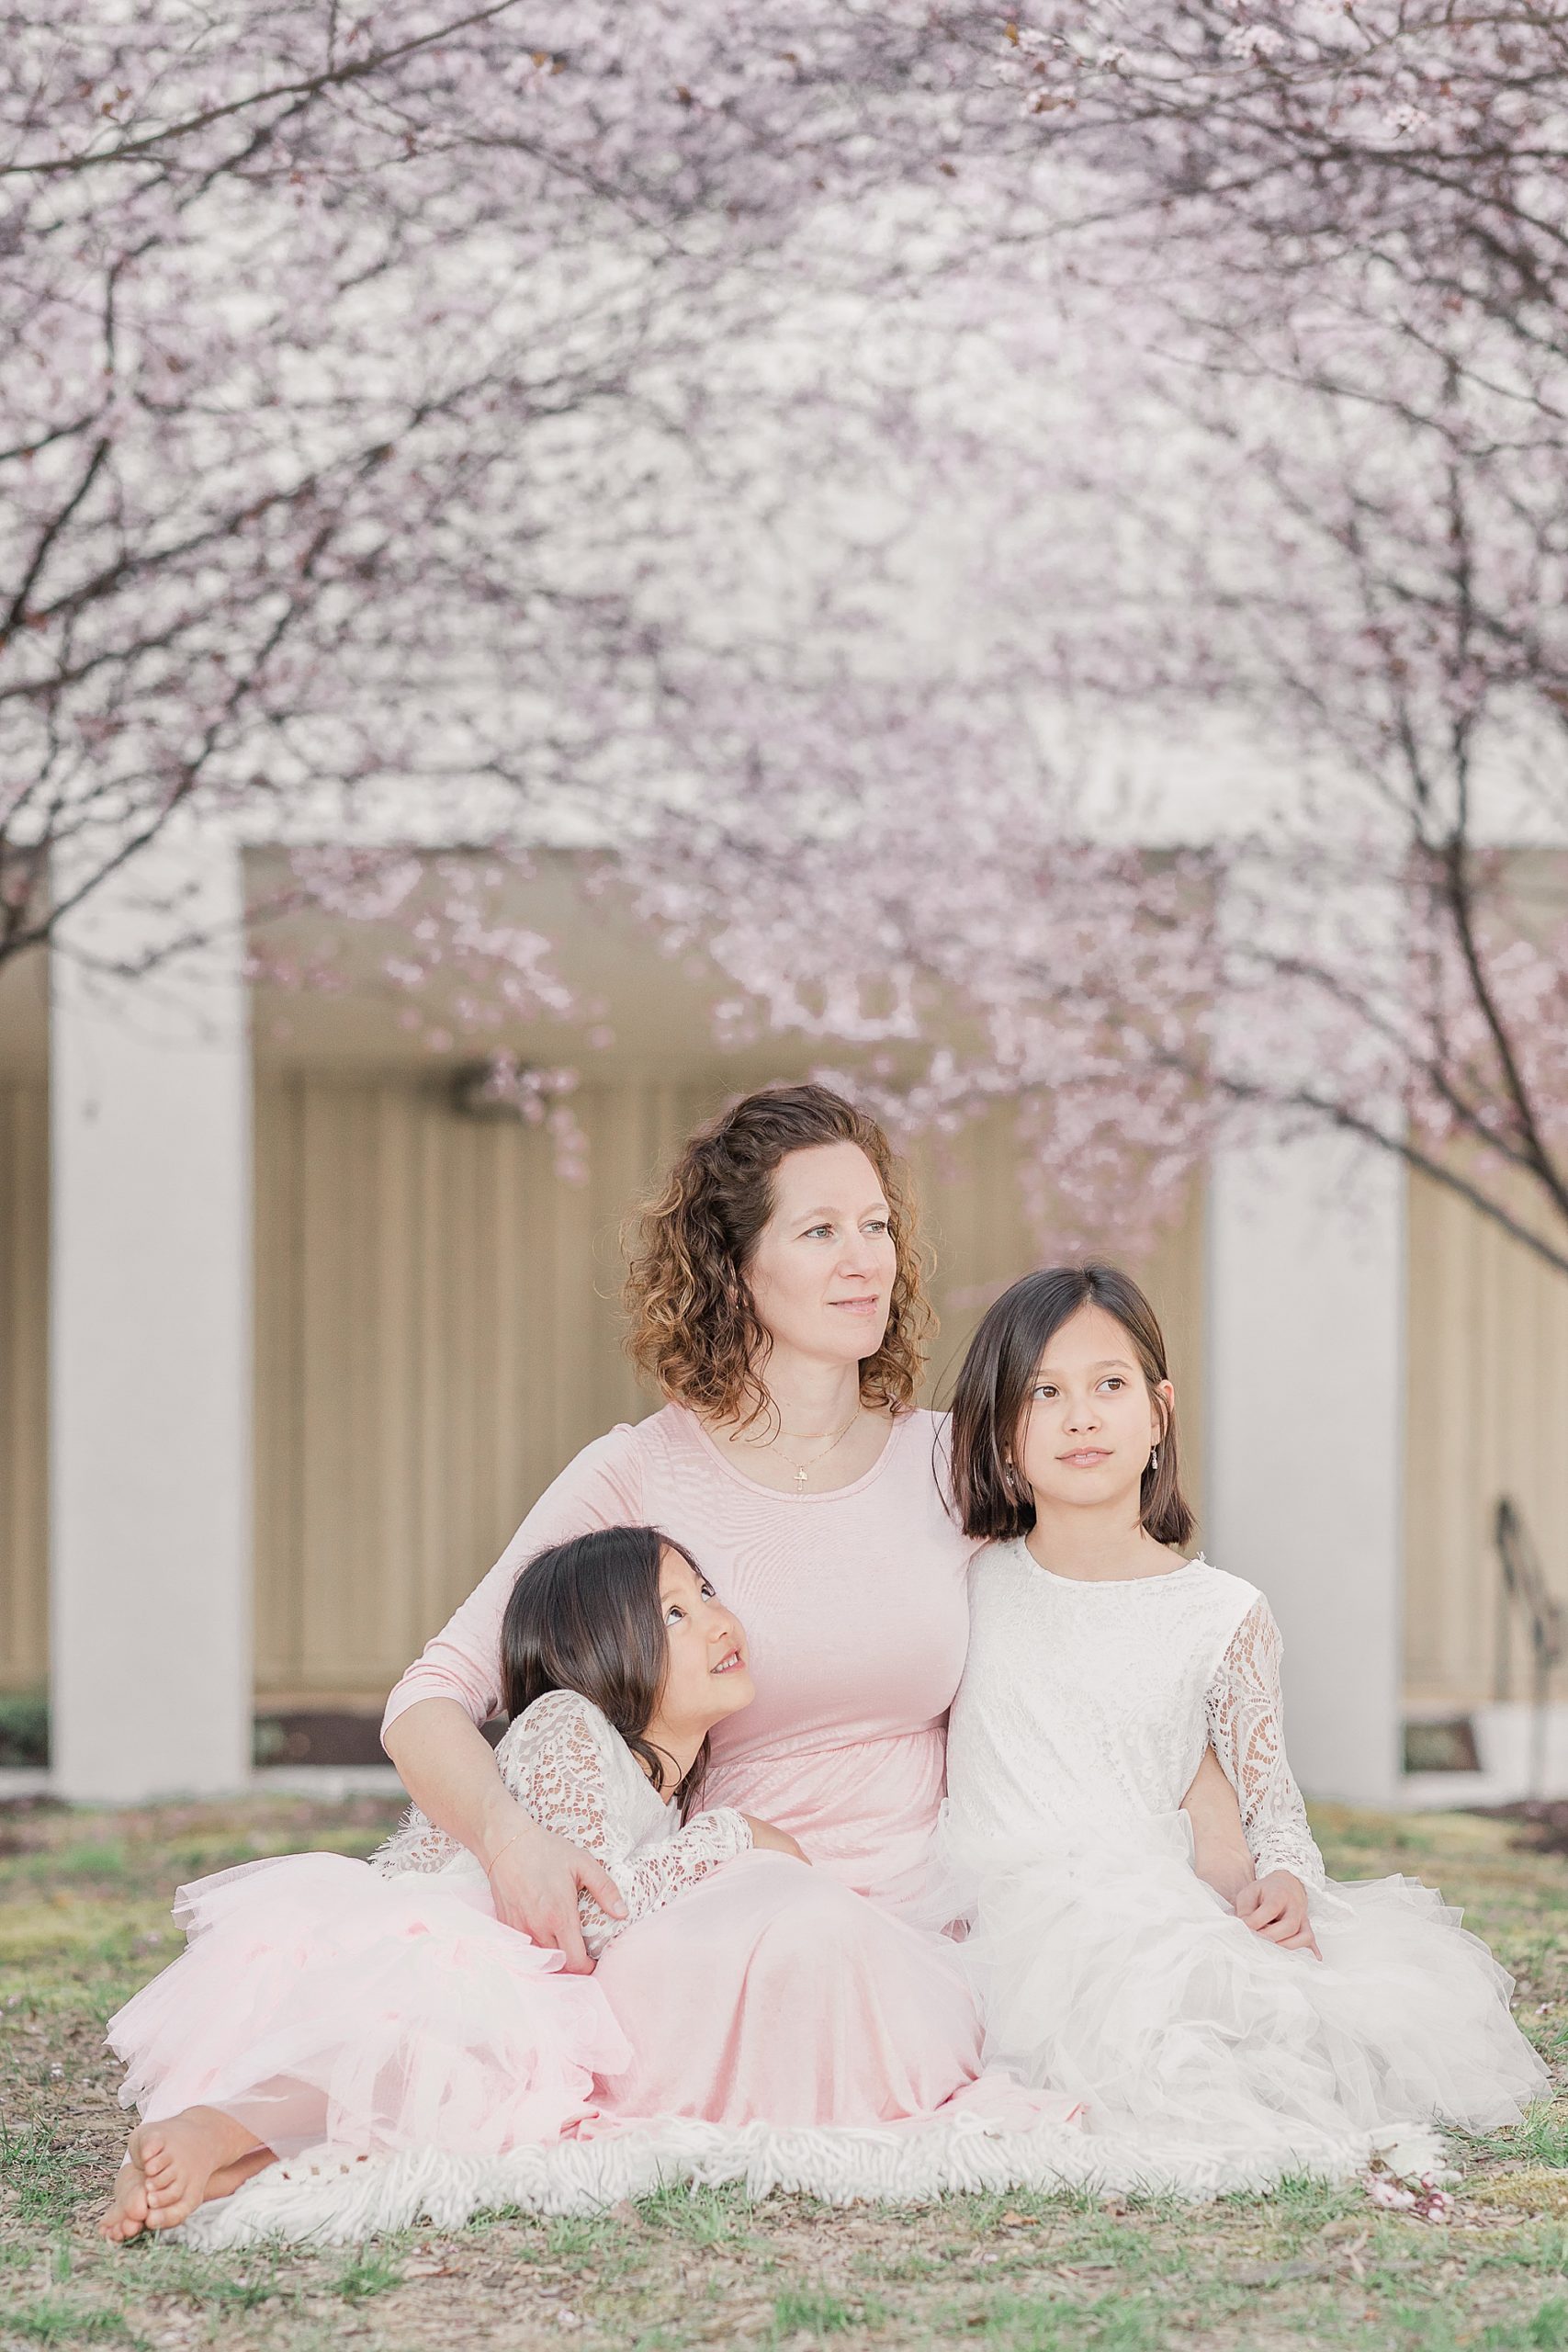 Tips for Cherry Blossom Portraits in the Spring in the DMV shared by Maryland family photographer Christina Tundo Photography